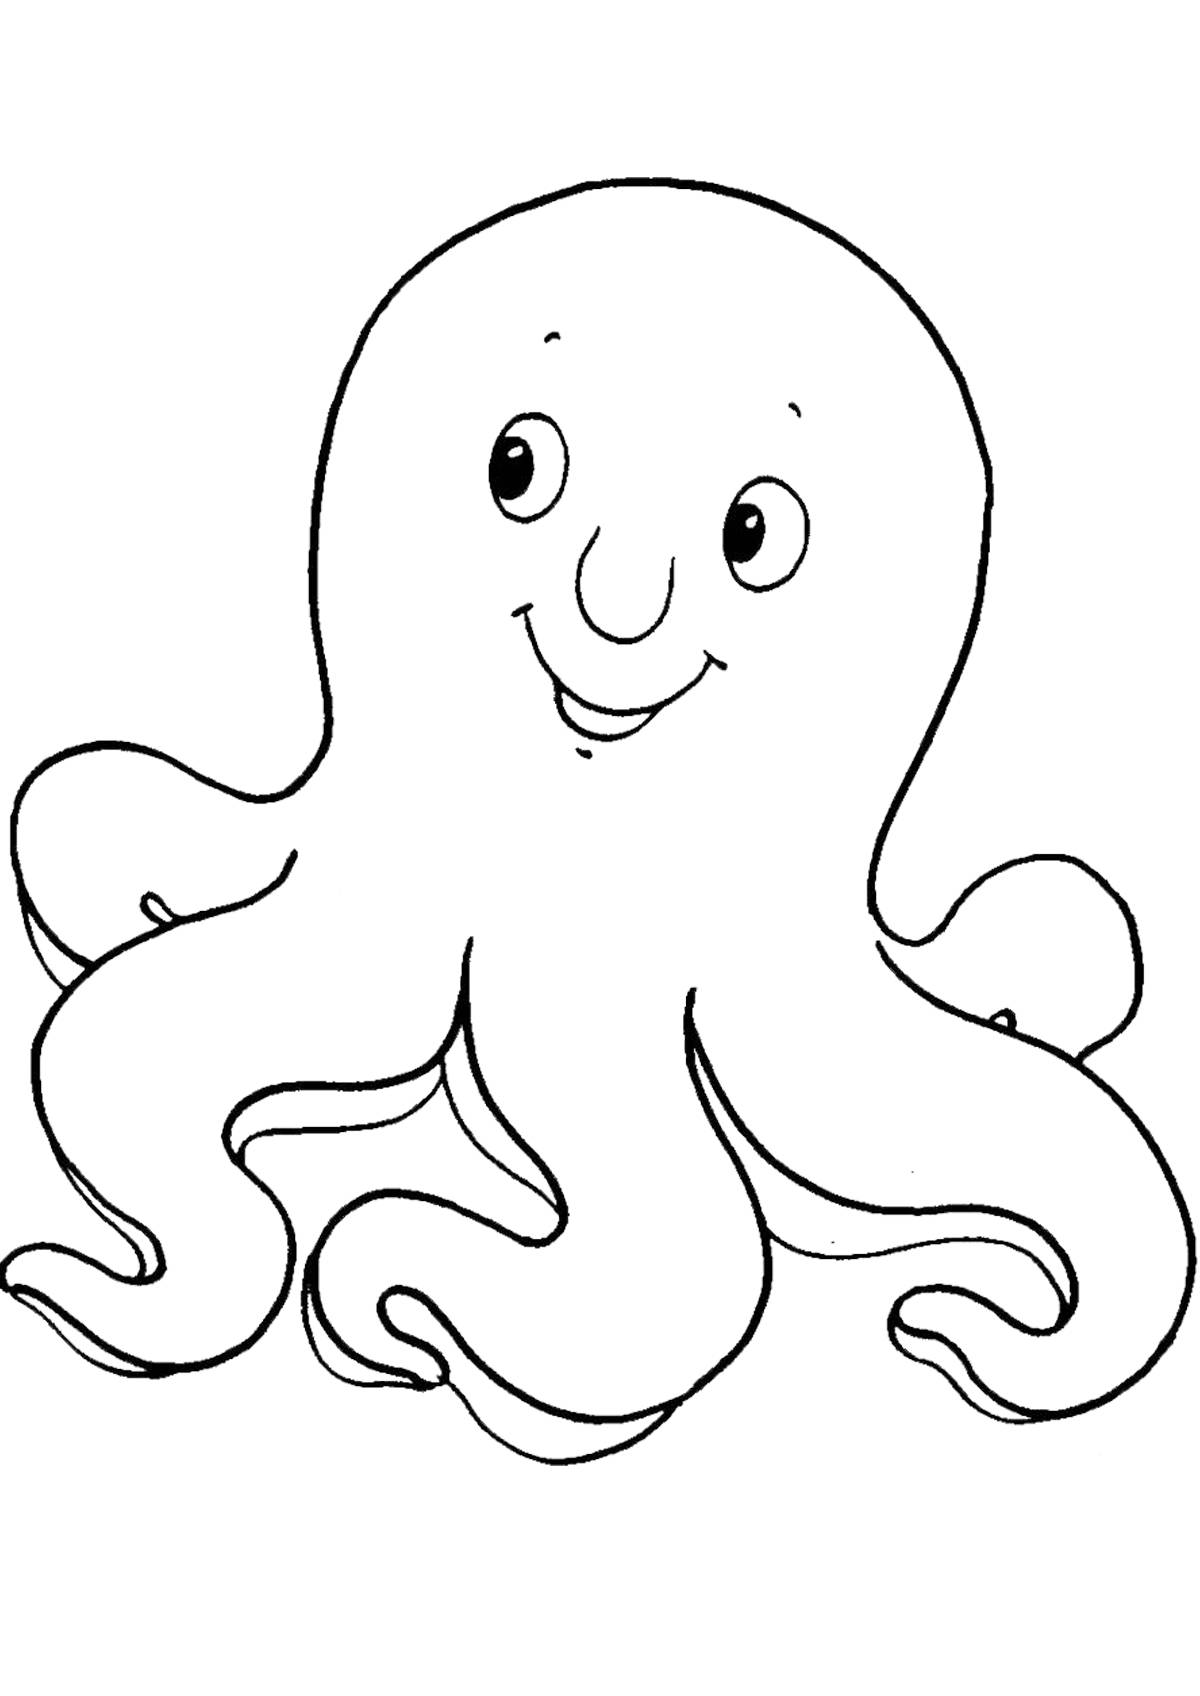 Coloring book happy octopus for kids